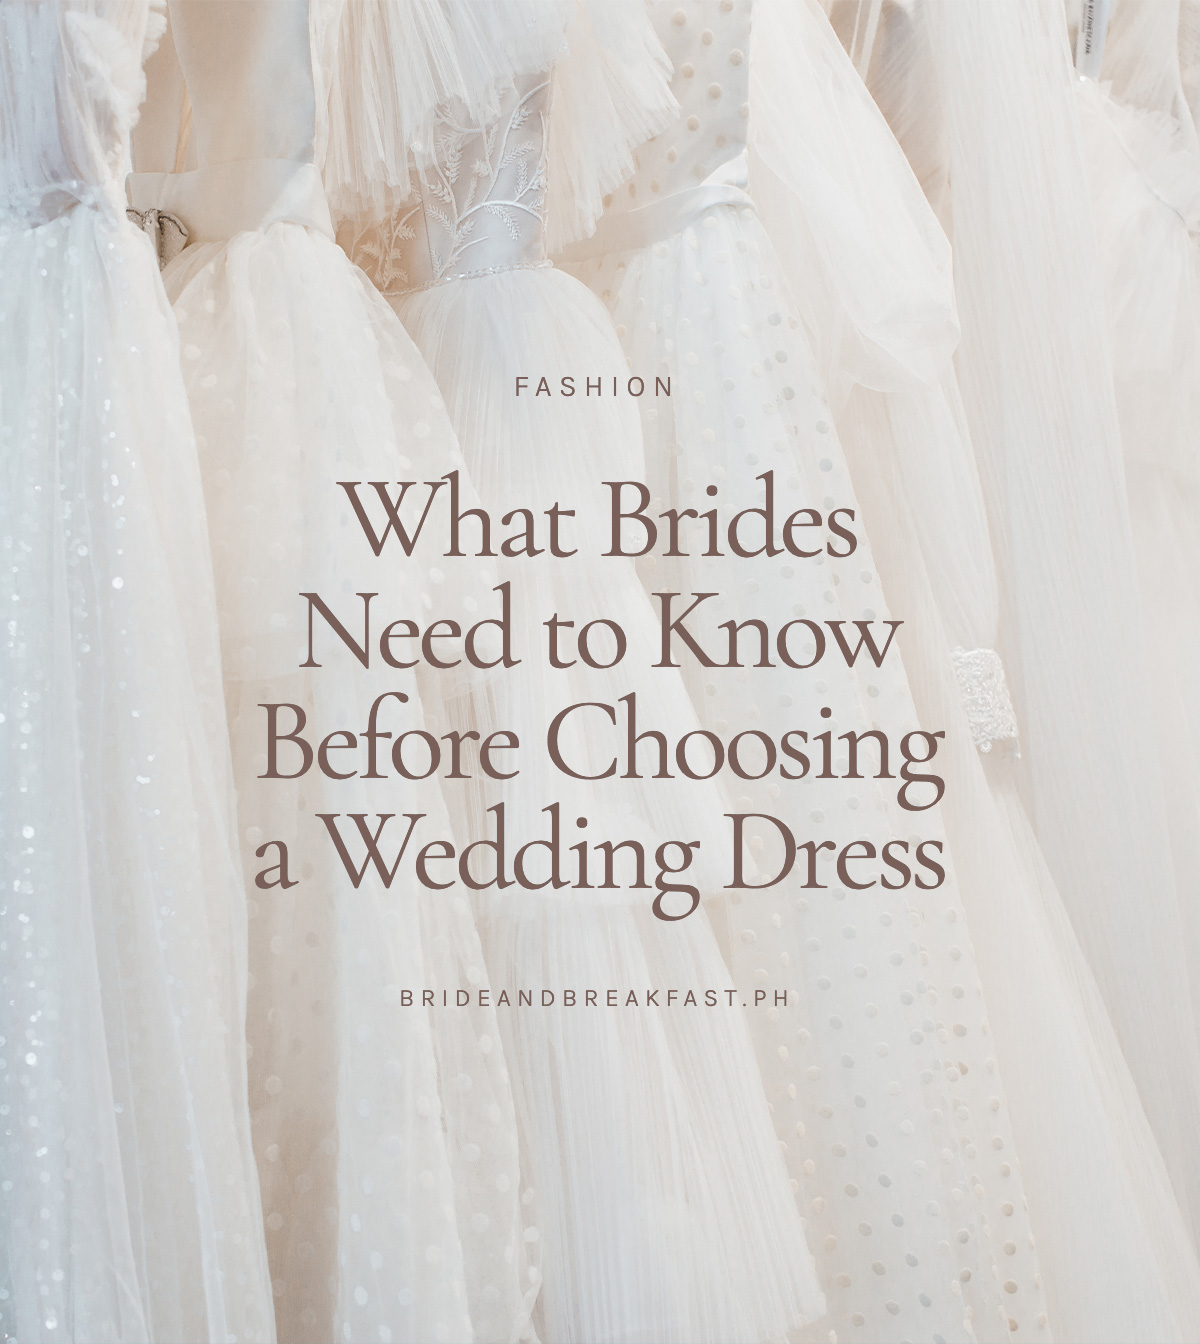 What Brides Need to Know Before Choosing a Wedding Dress